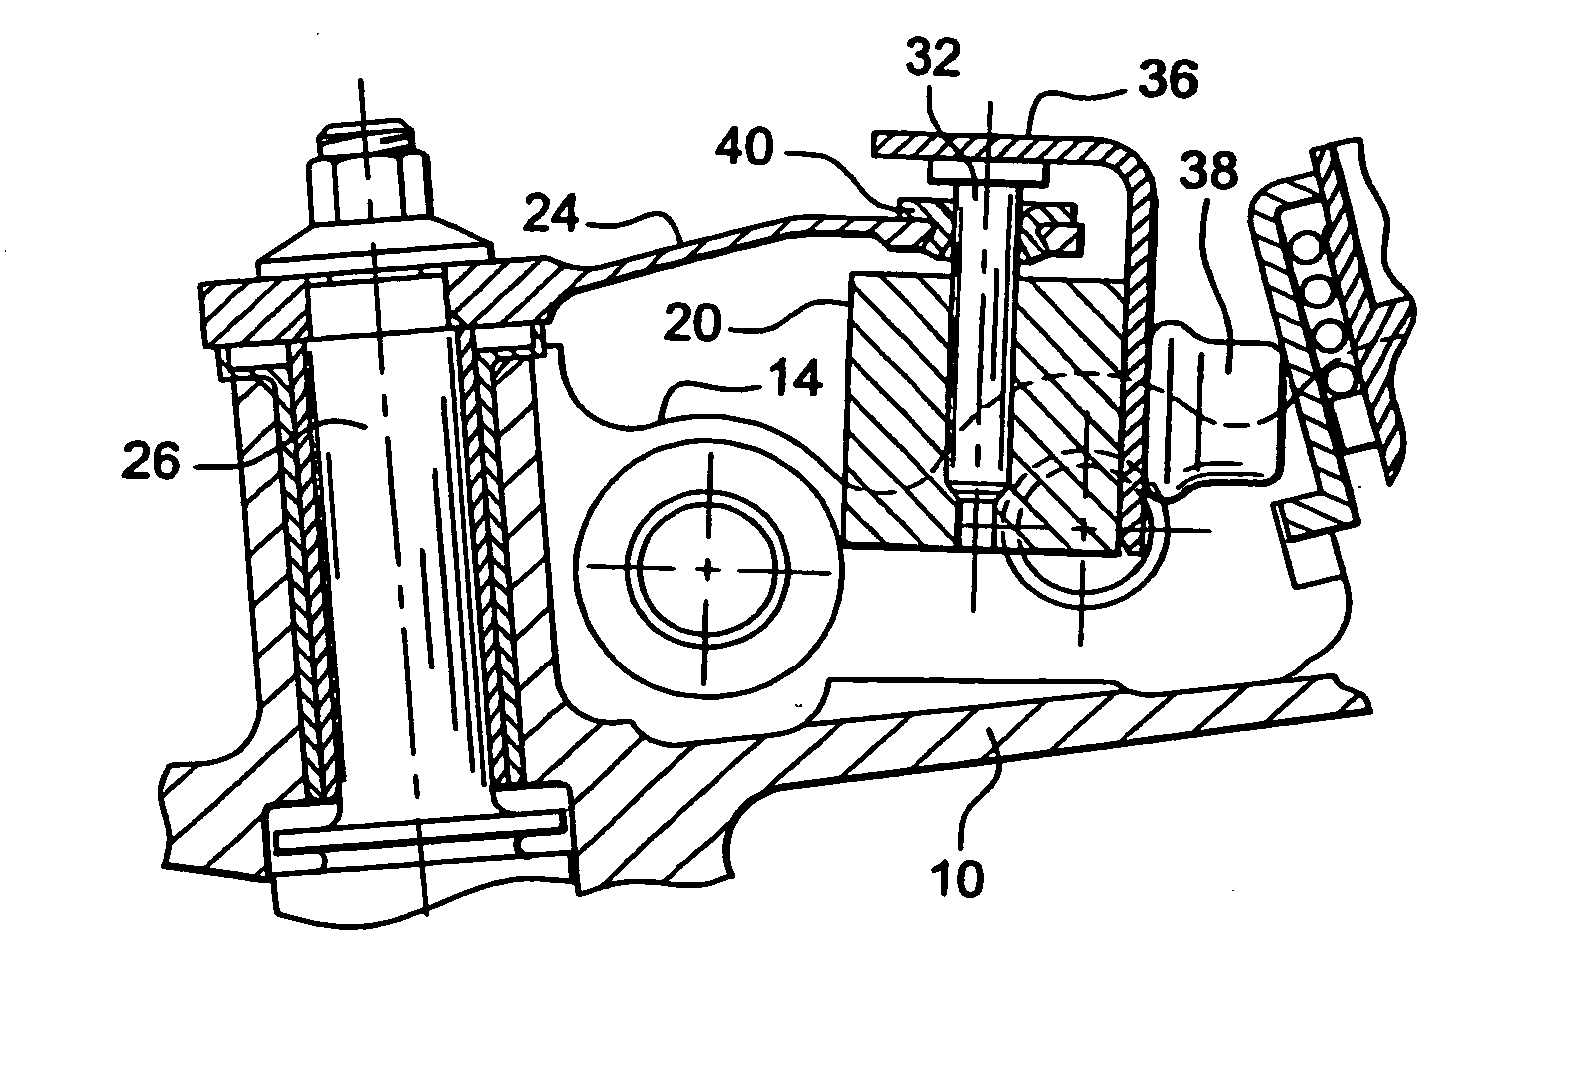 Device for controlling variable-pitch vanes in a turbomachine